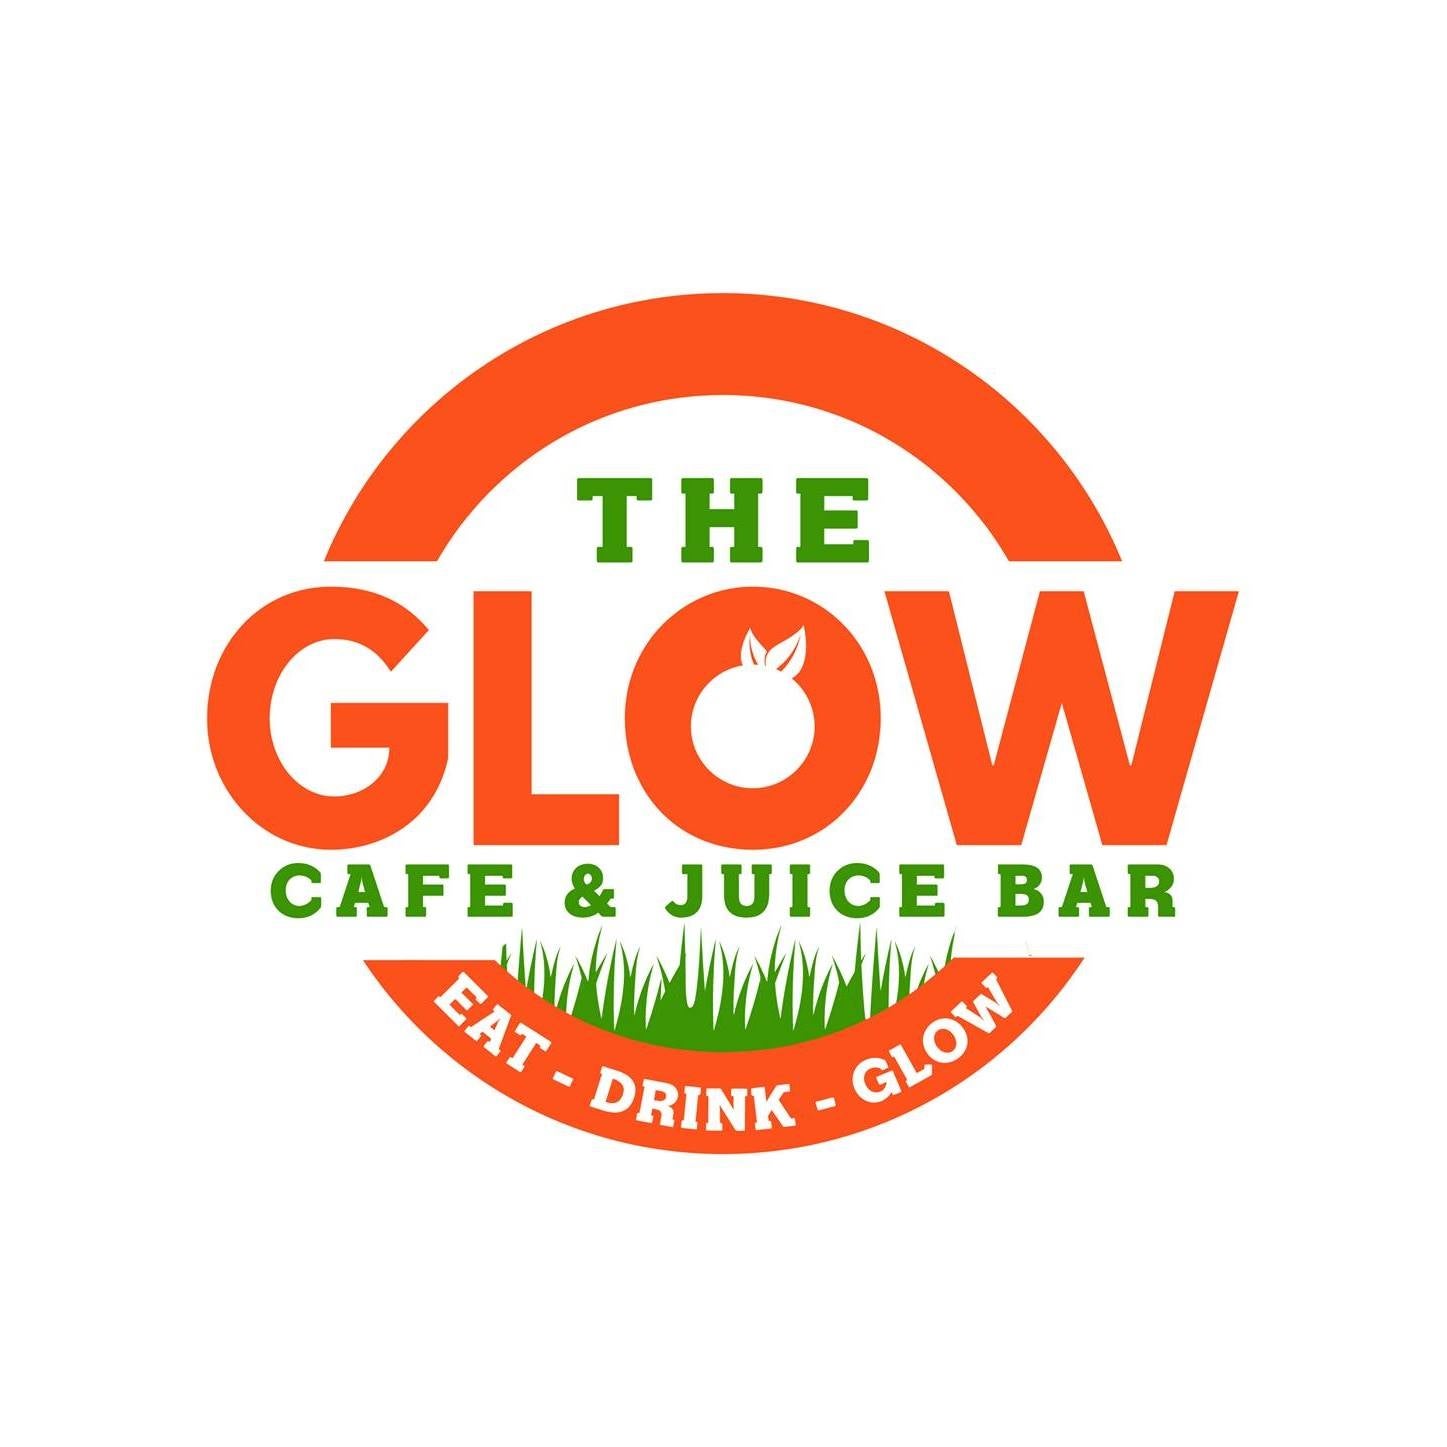 Fresh juice bar logo or poster. Glass with orange juice and juice in bottle  to go